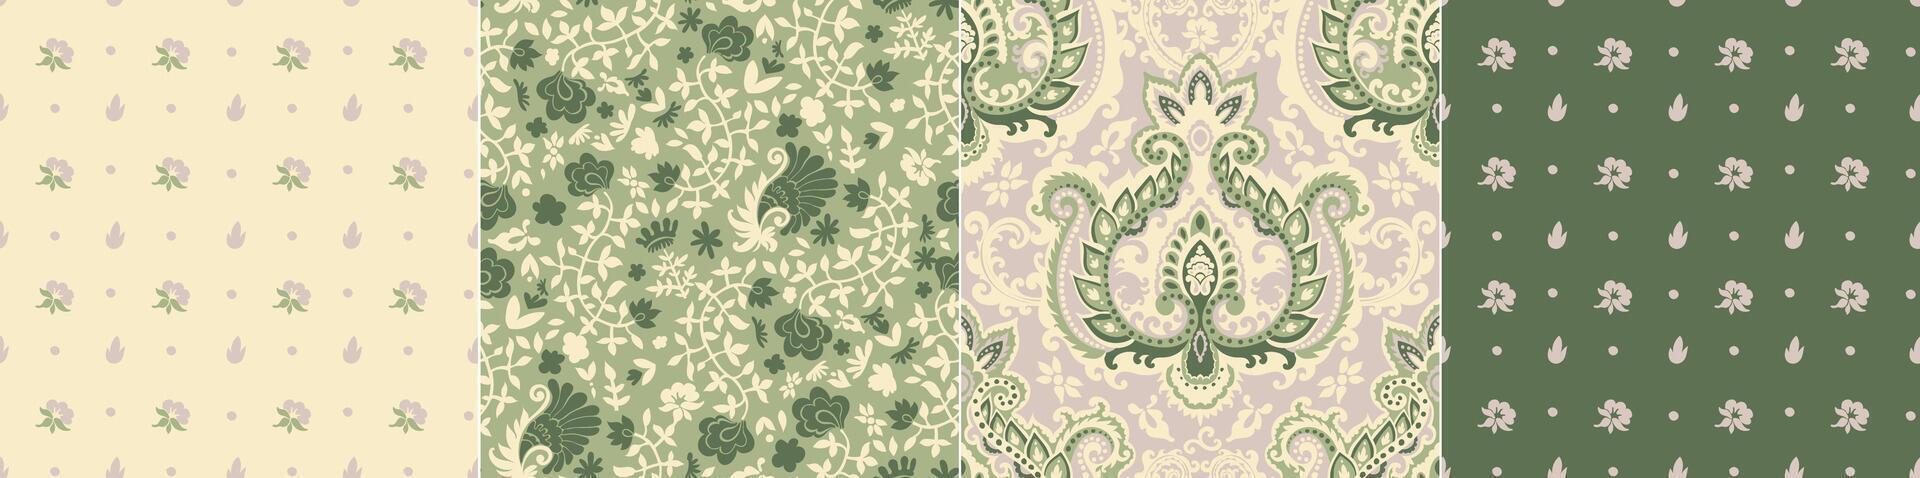 Paisley set of pattern collection vector